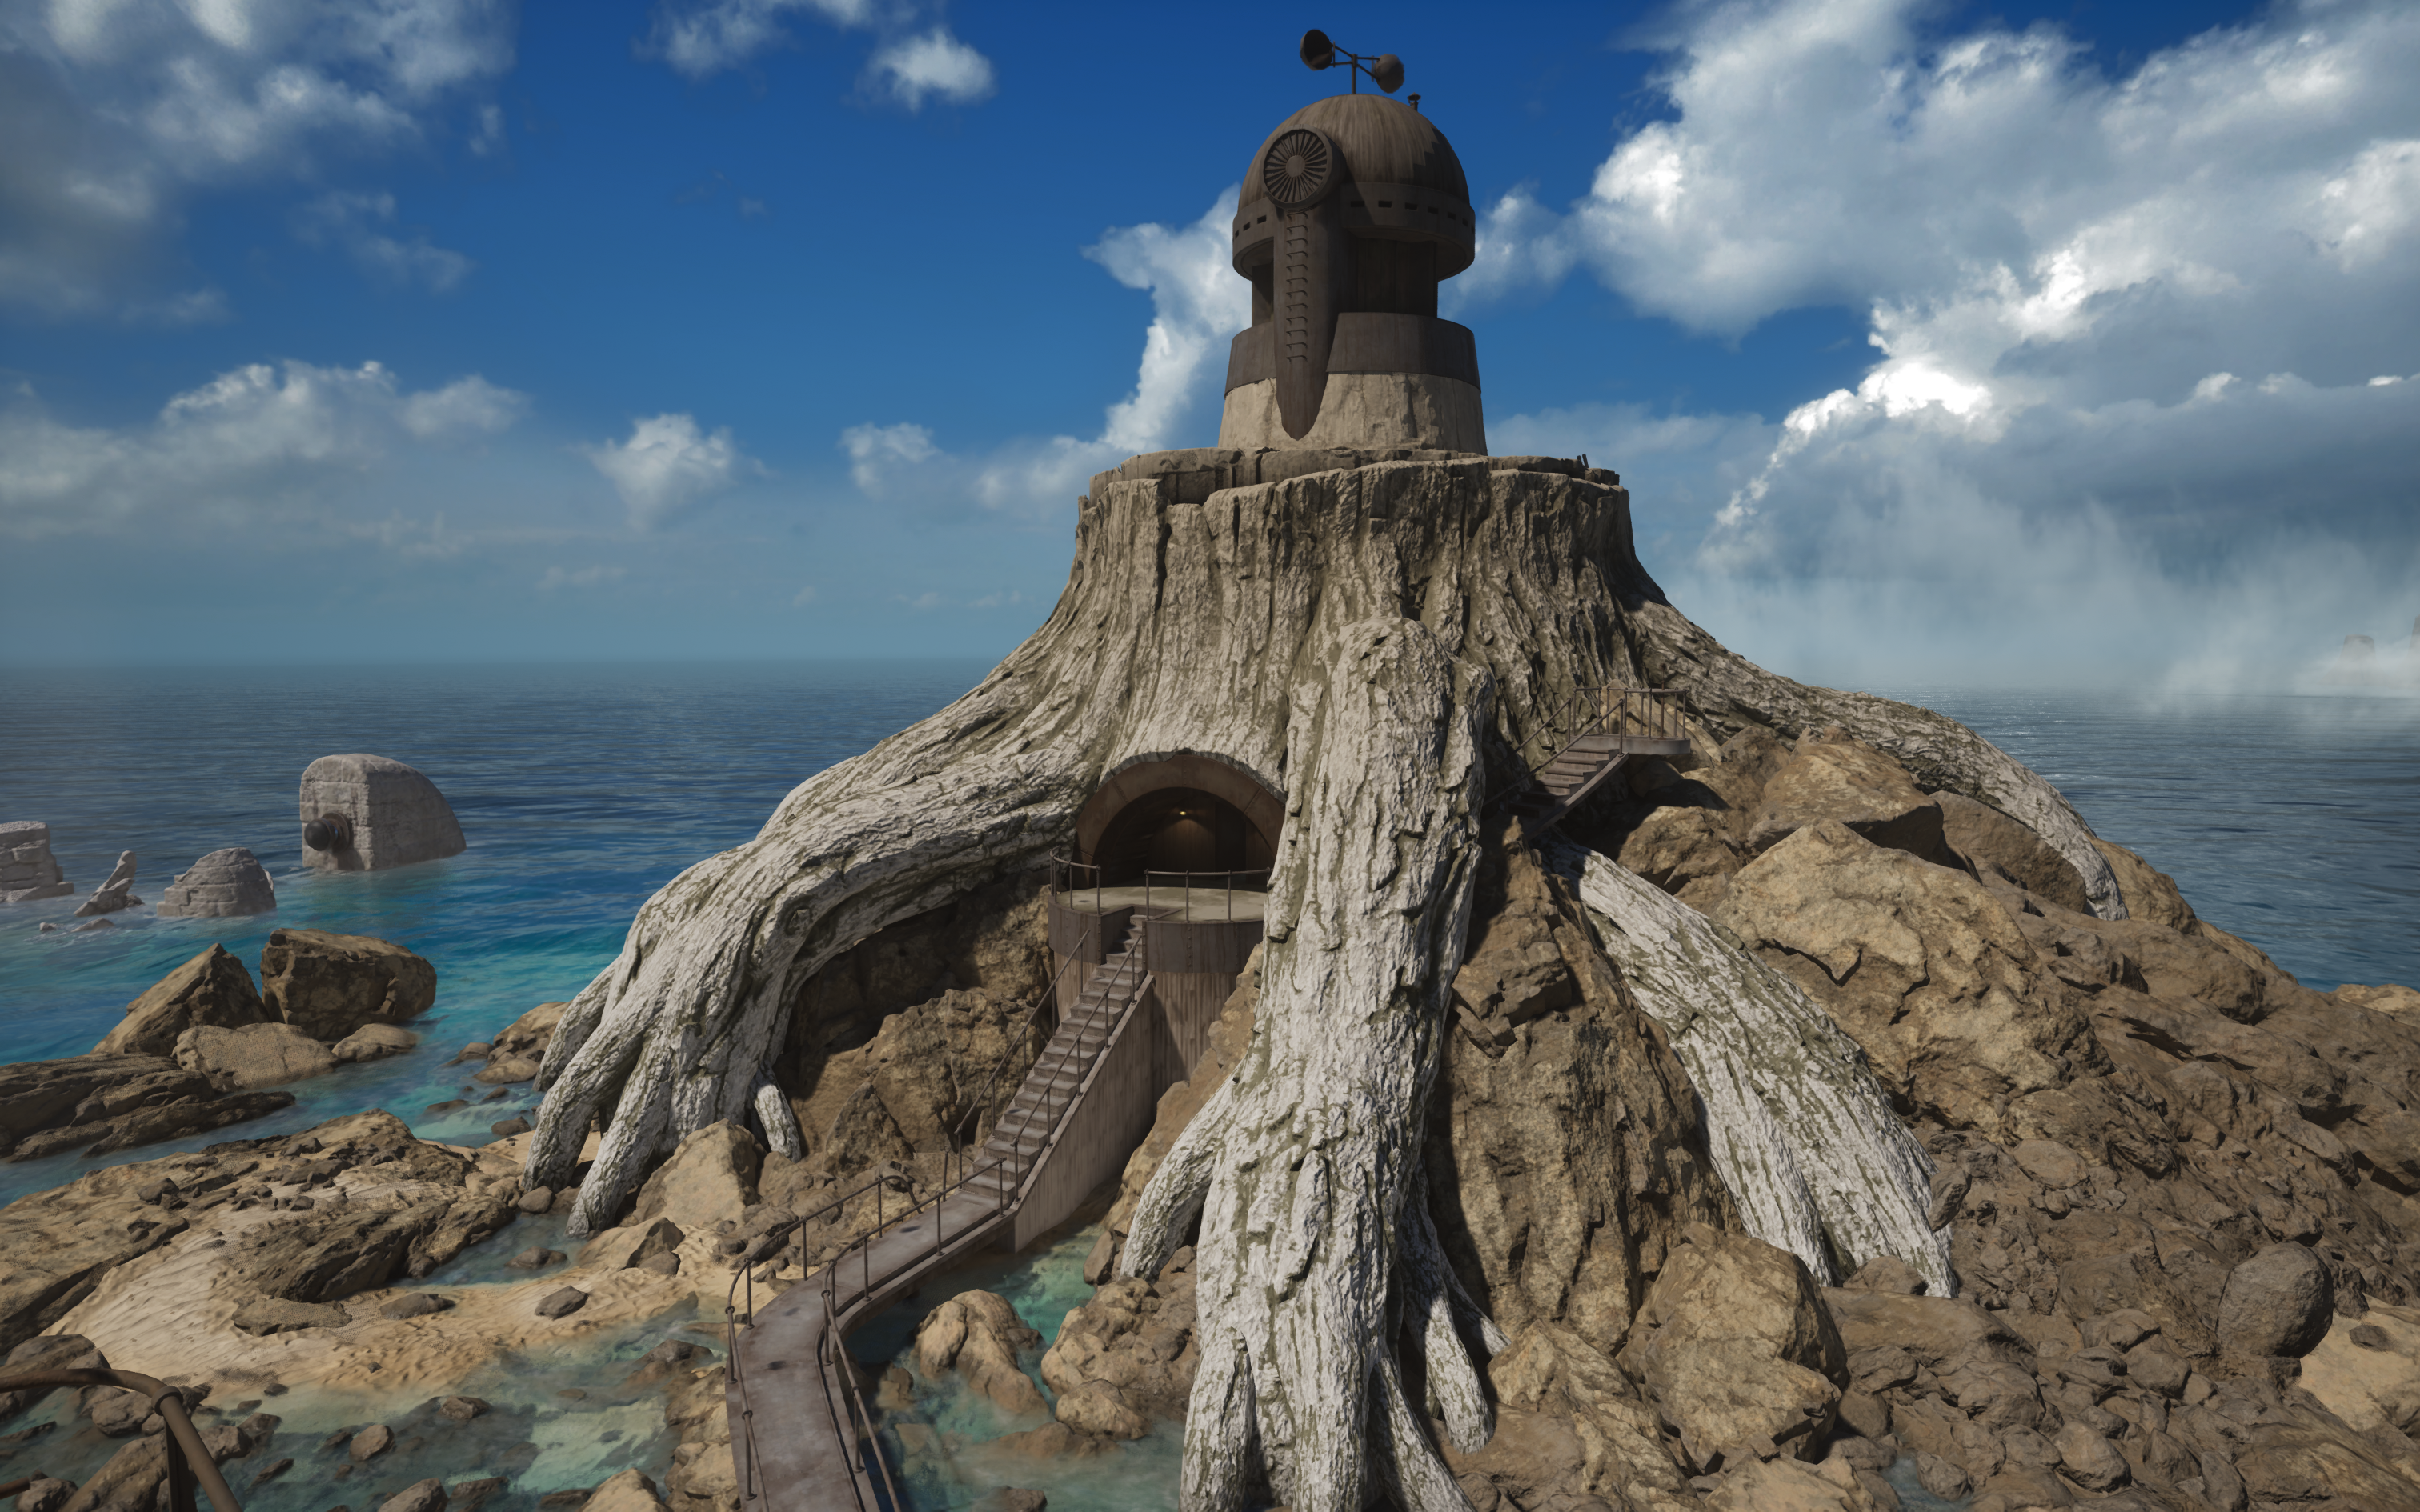 screenshot from the game Riven of the prison island, prominently featuring a blue, partly cloudy sky above an island comprised of half a huge tree trunk with a steampunk dome atop it